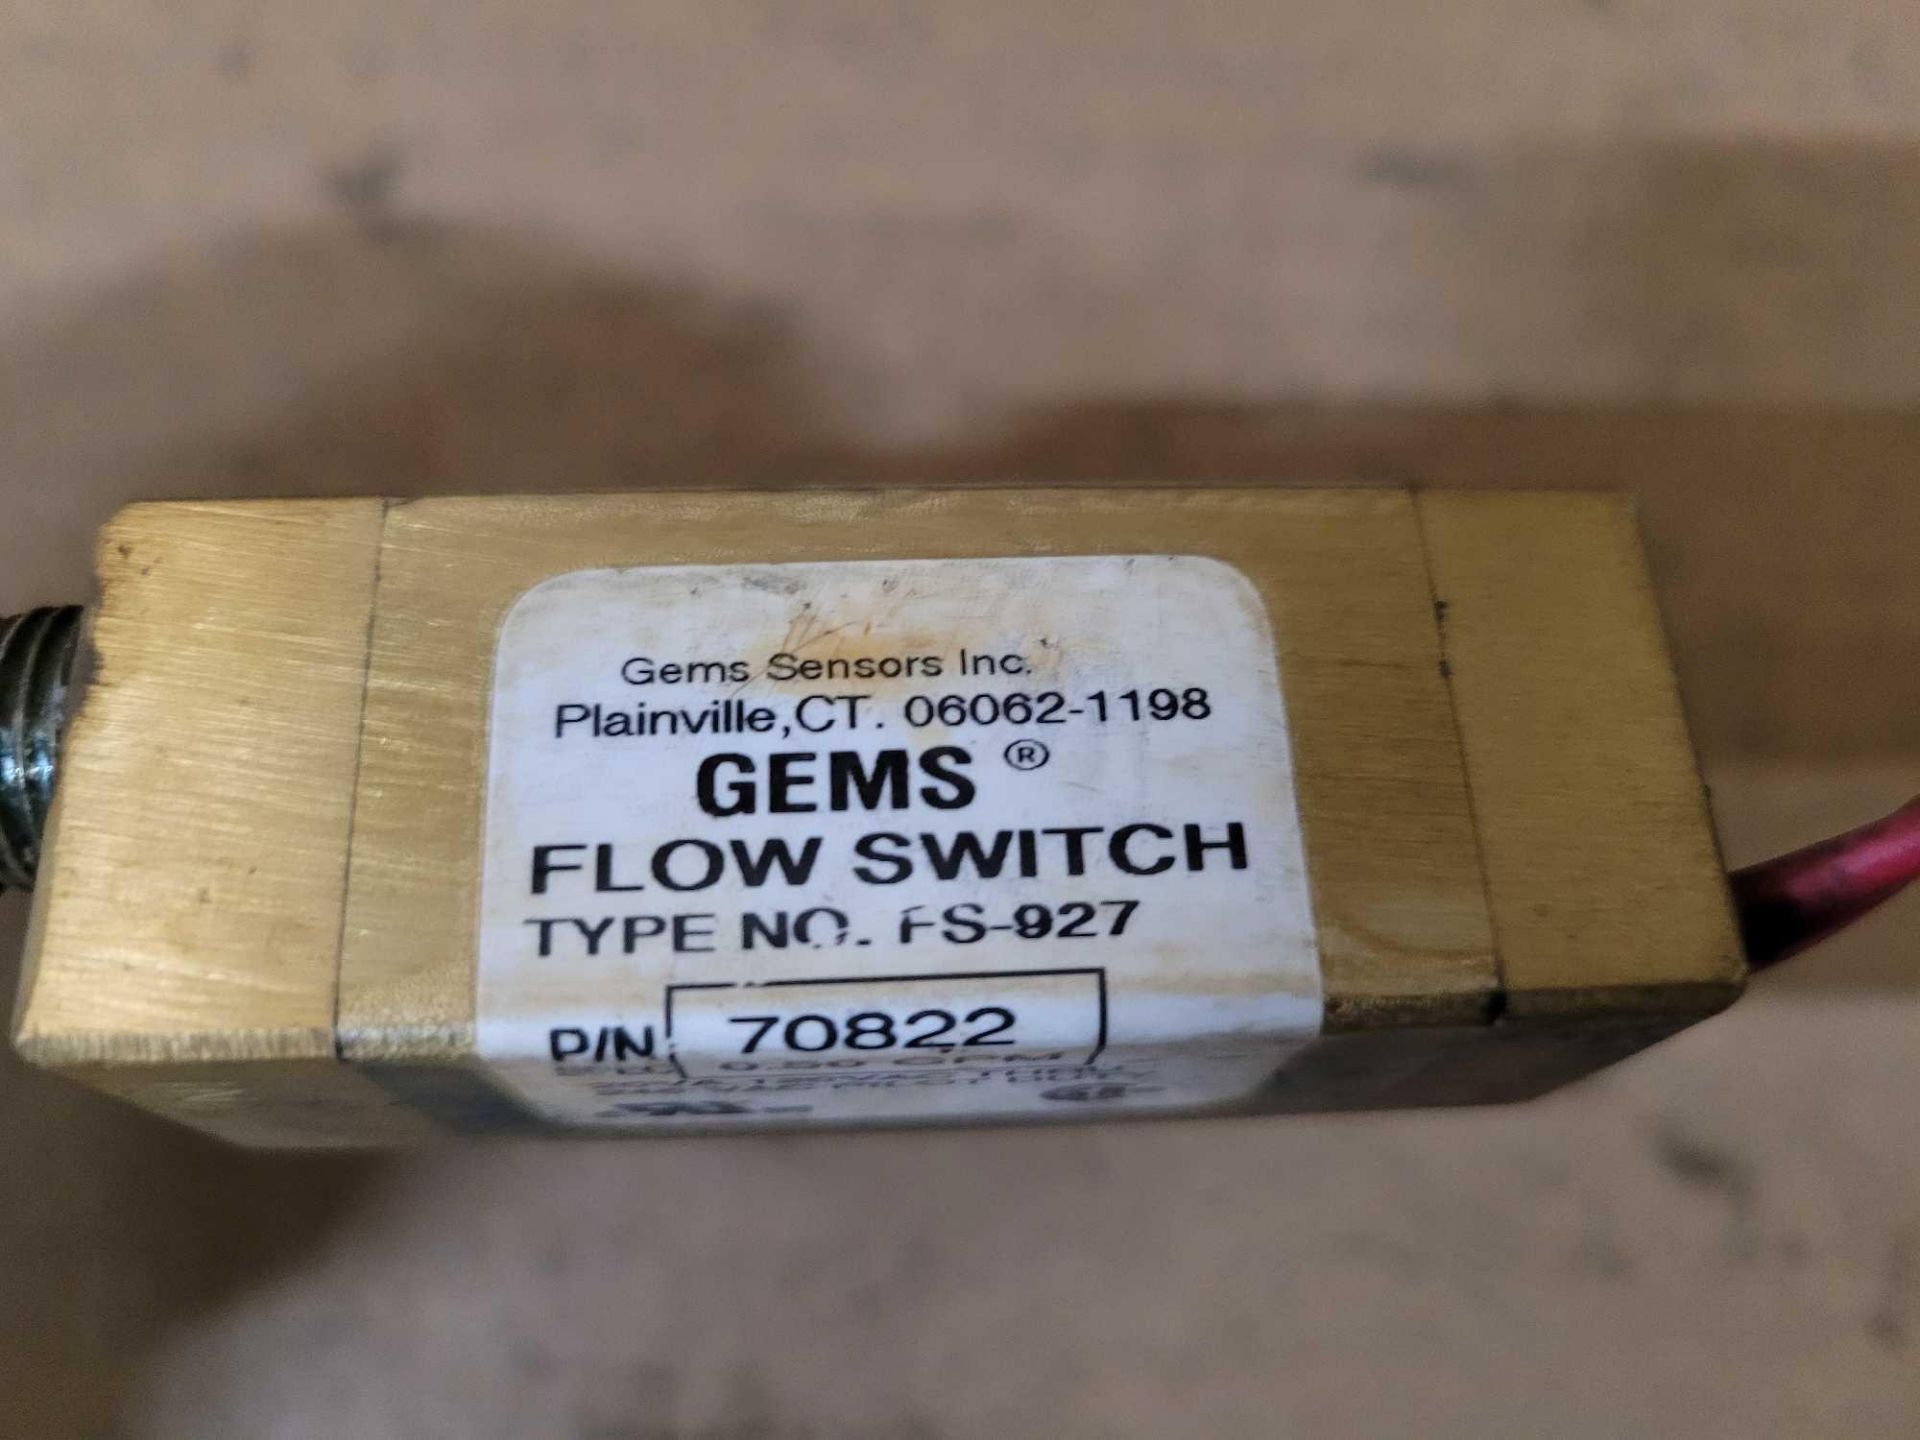 LOT OF 10 GEMS FS-927 FLOW SWITCH - Image 2 of 3